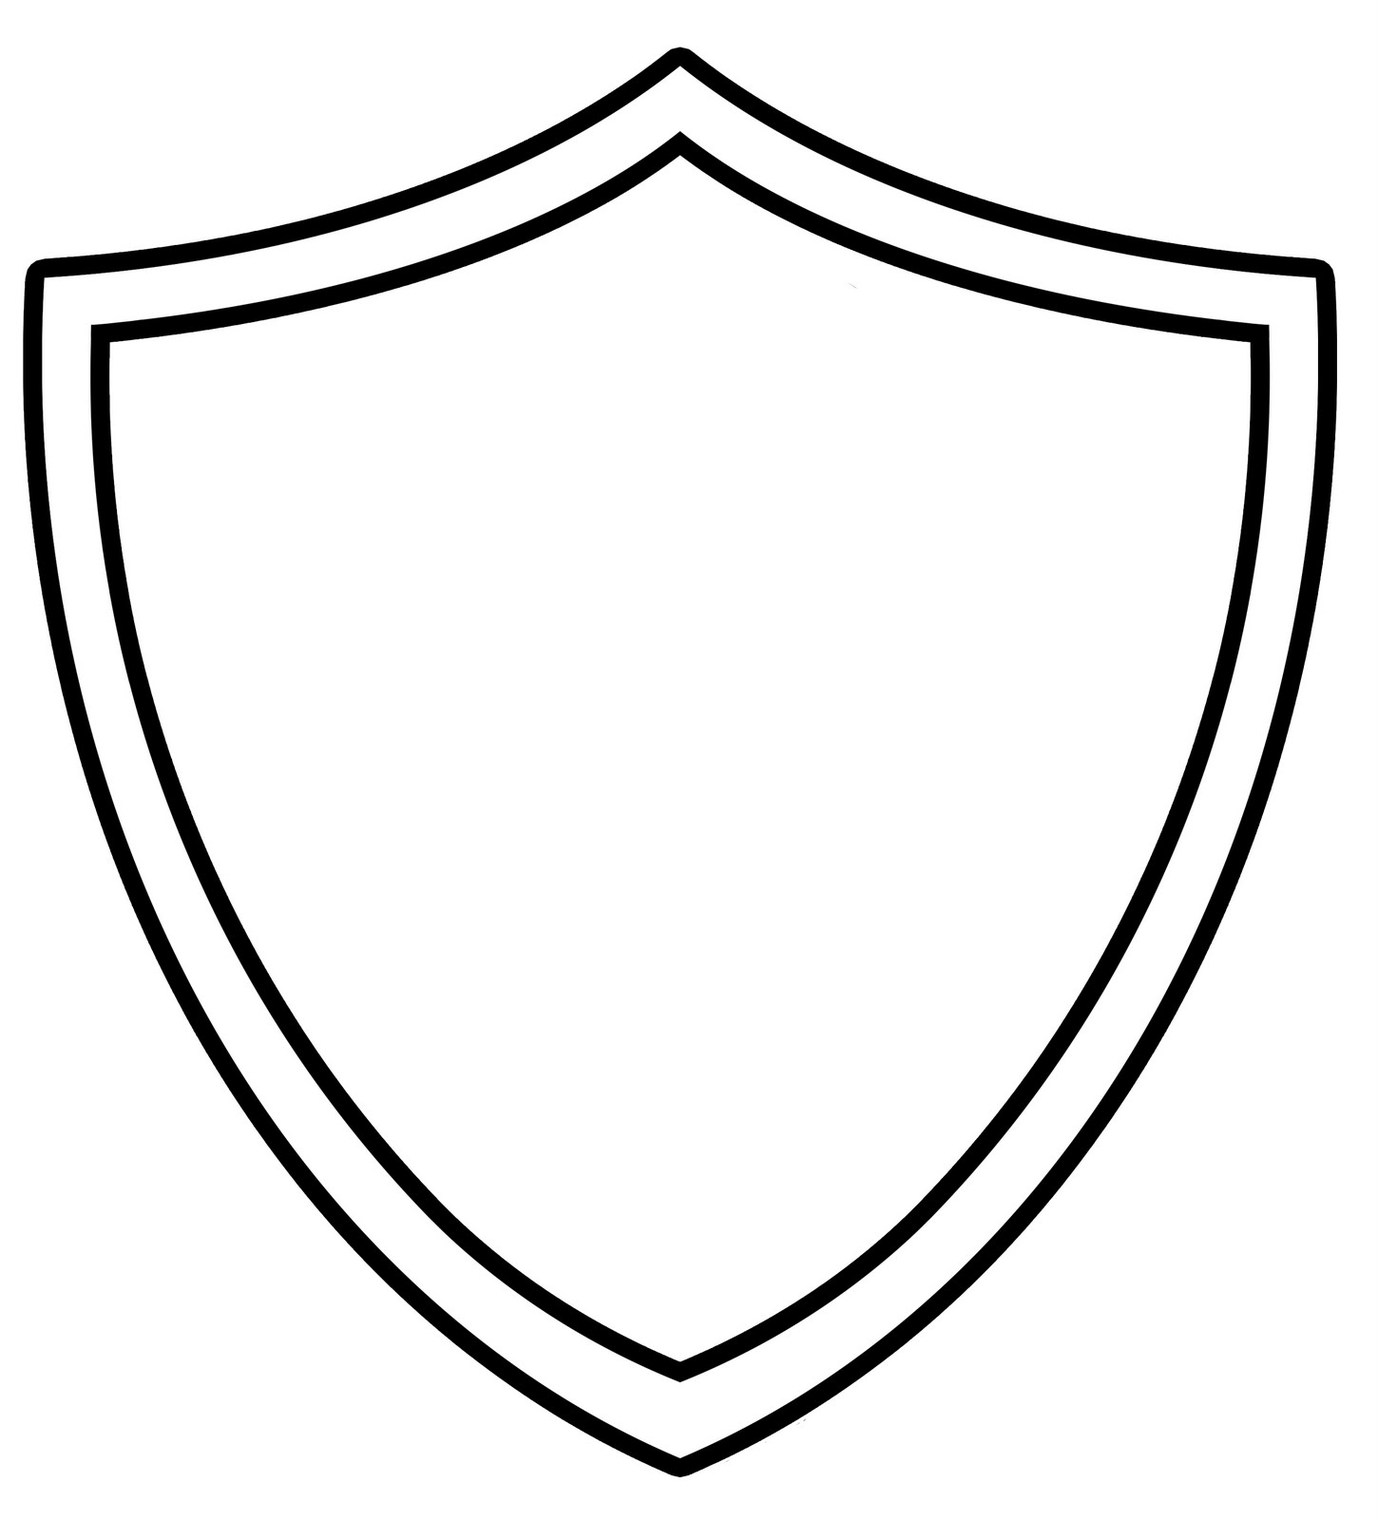 Blank Superman Shield Writing Template Clipart - Free to use Clip ...